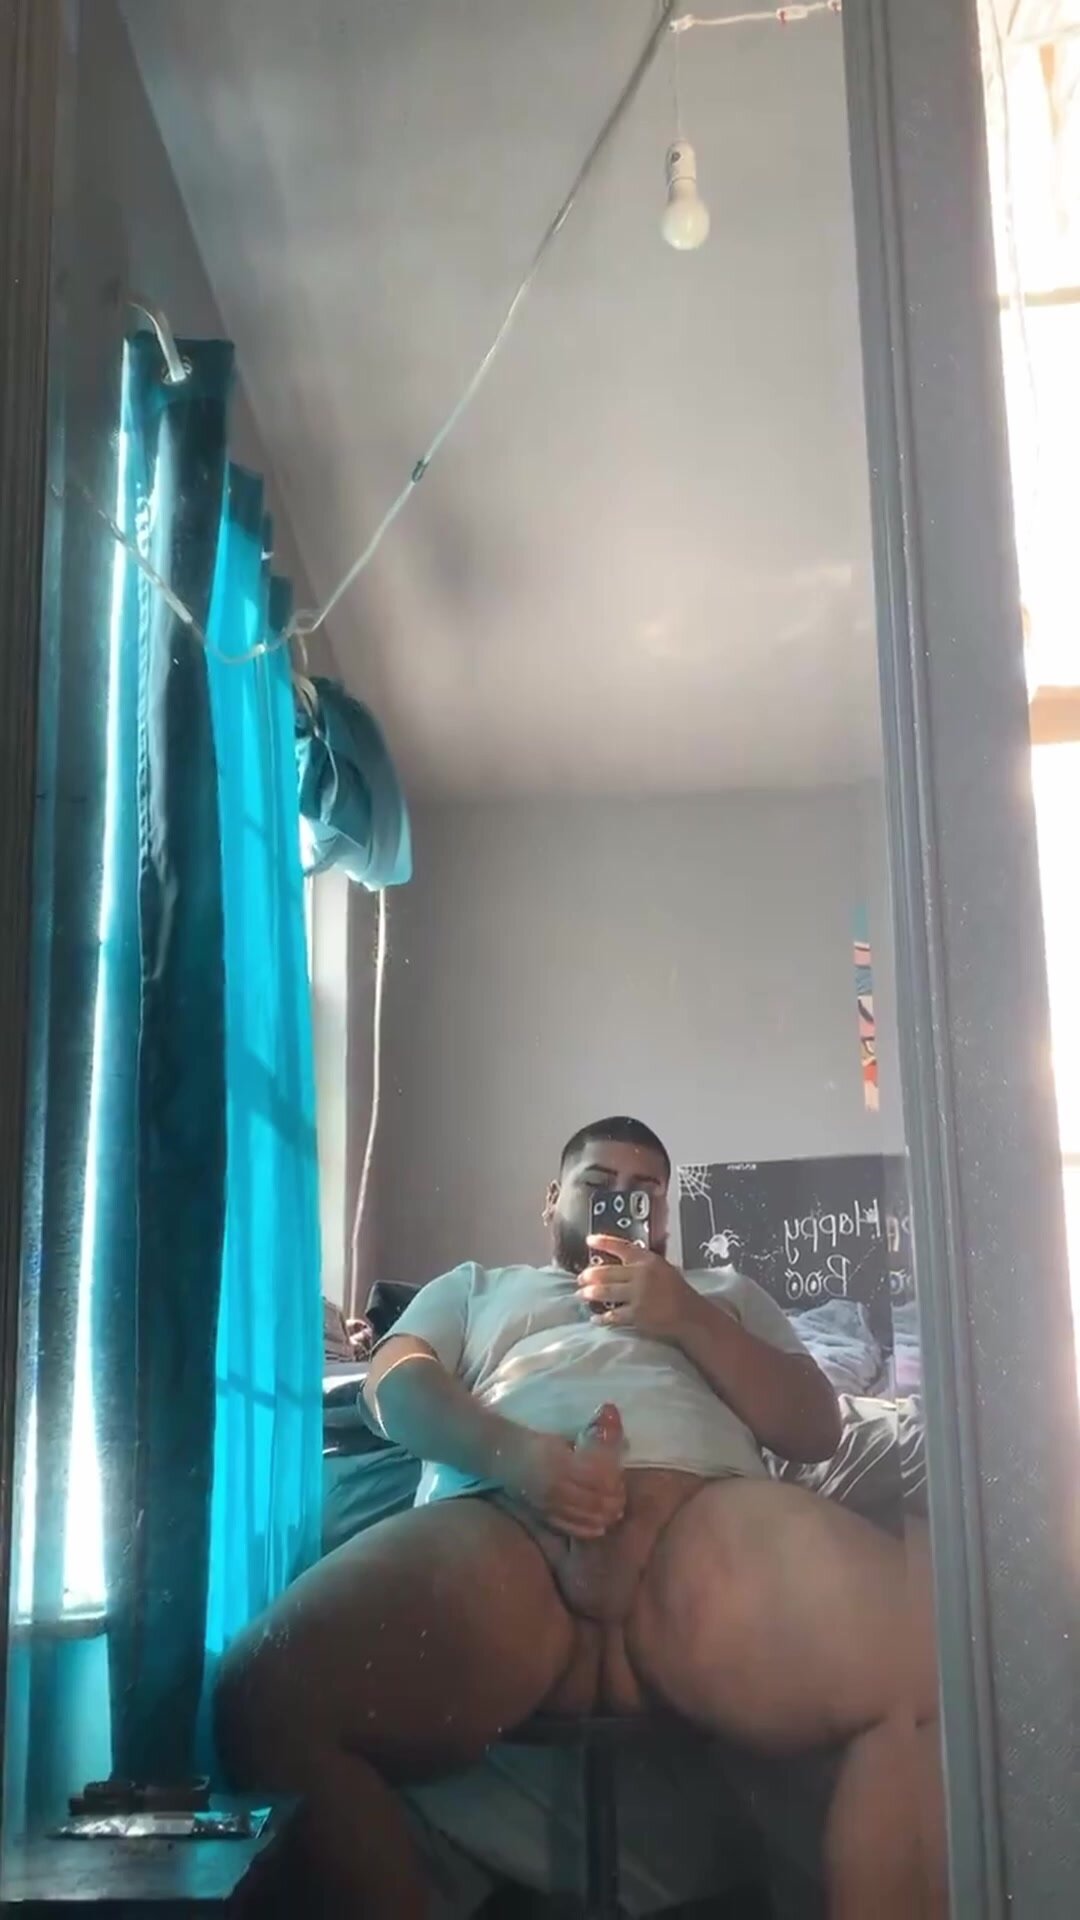 Chubby Guy Jerking His Fat Cock